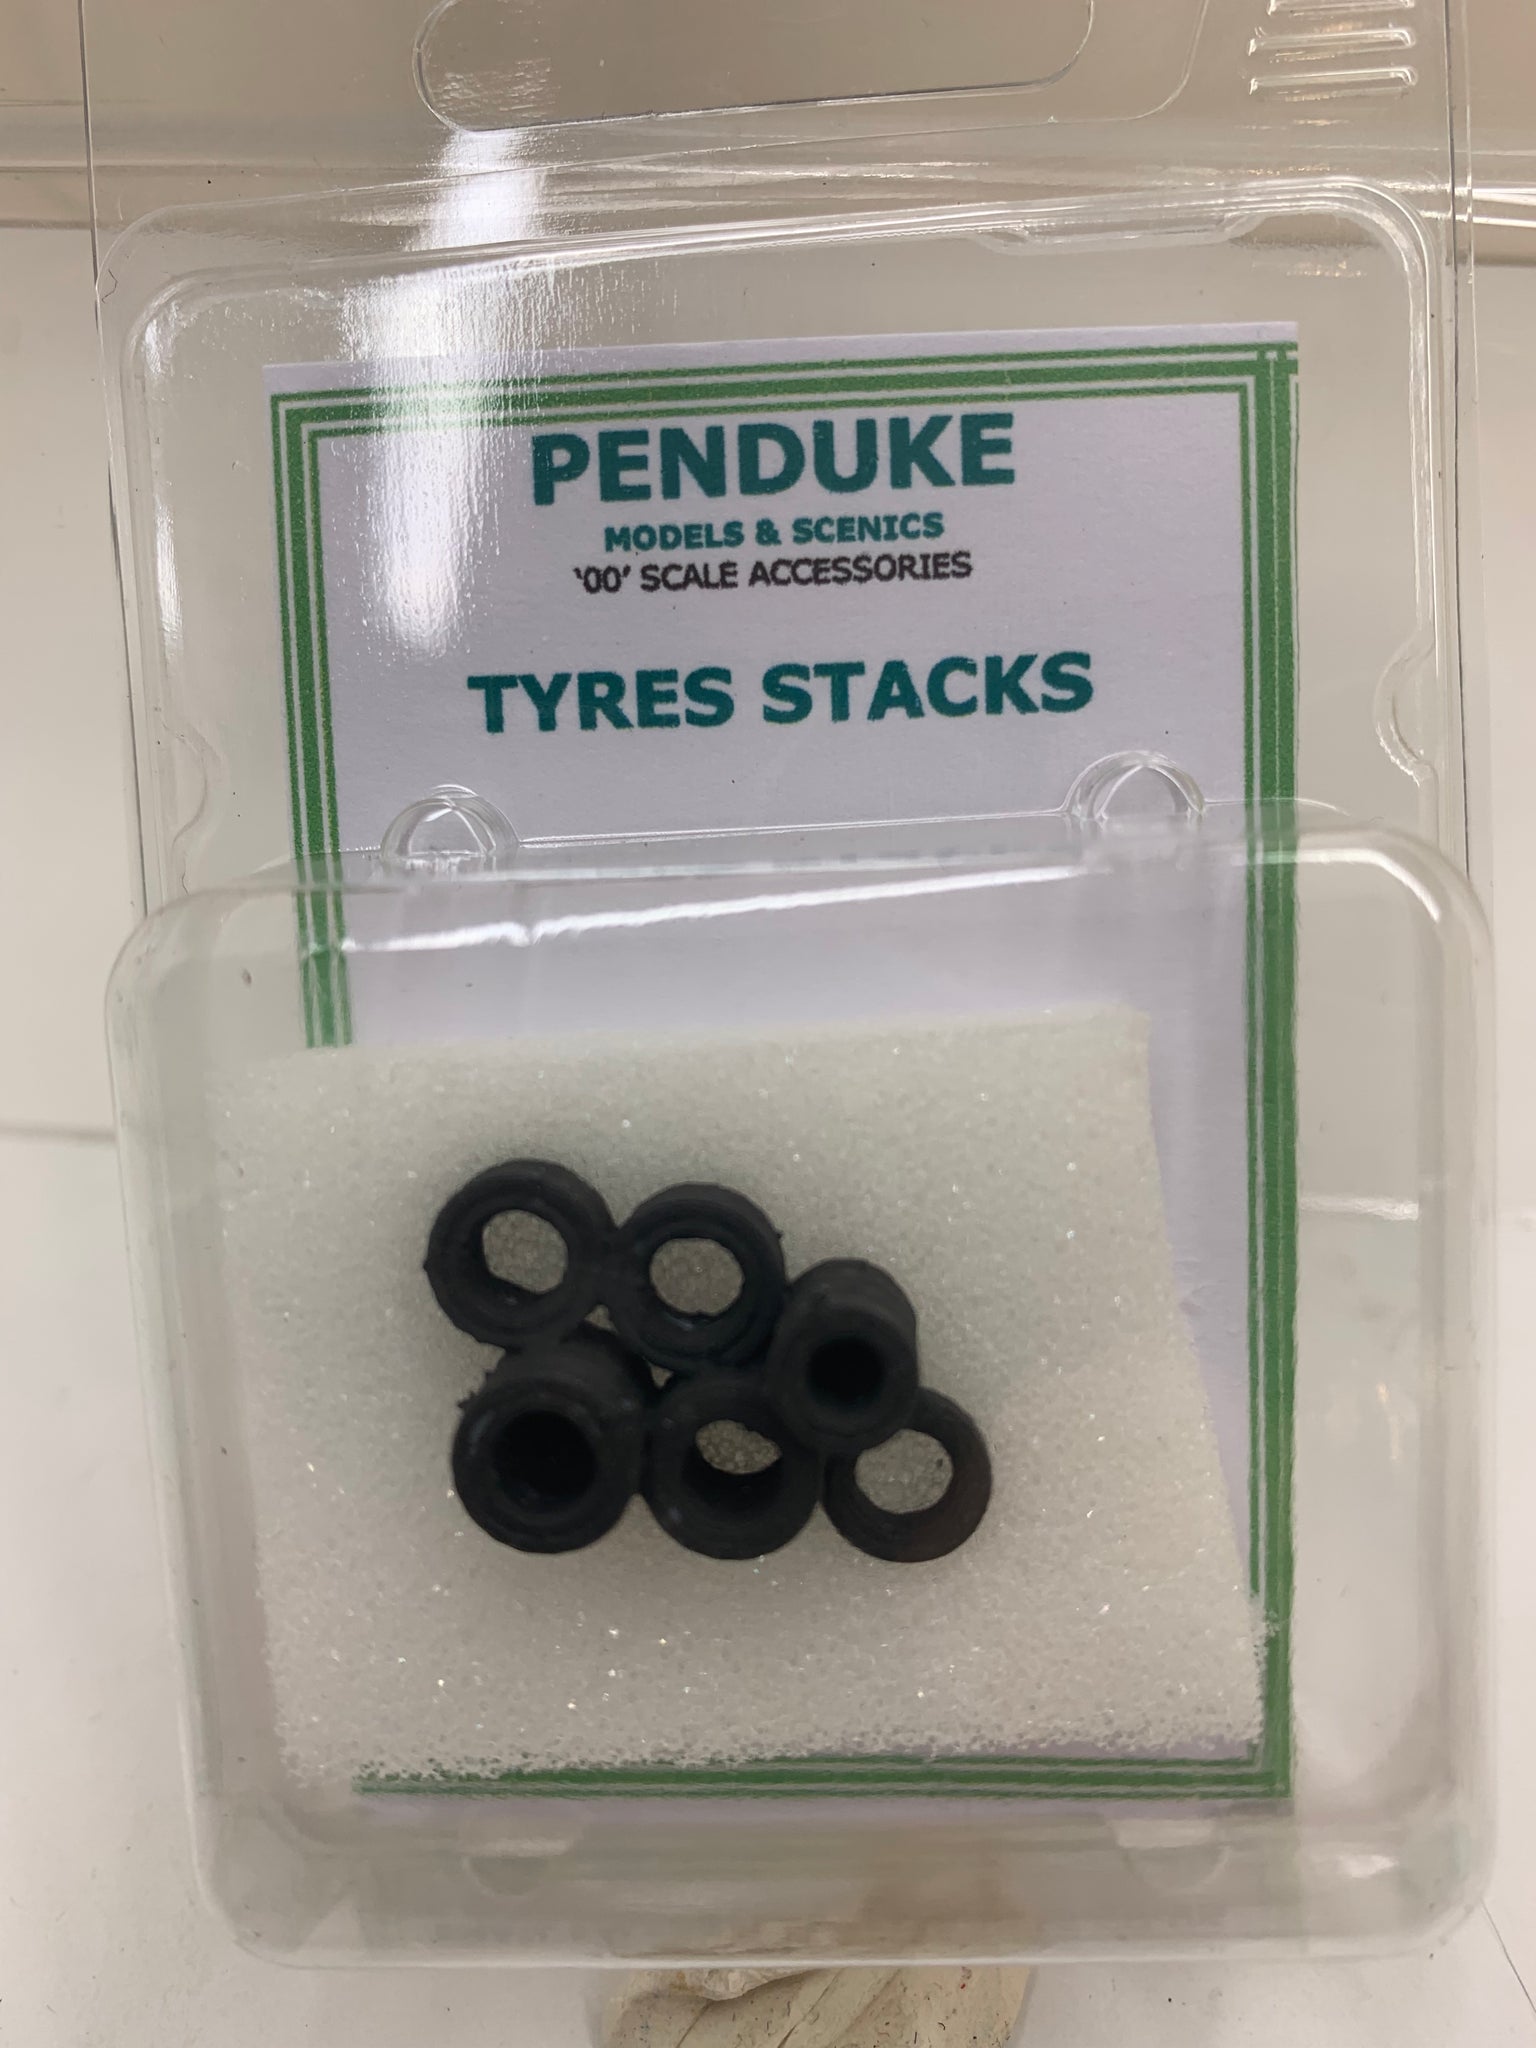 TYRE STACKS 3D PRINTED '00' SCALE